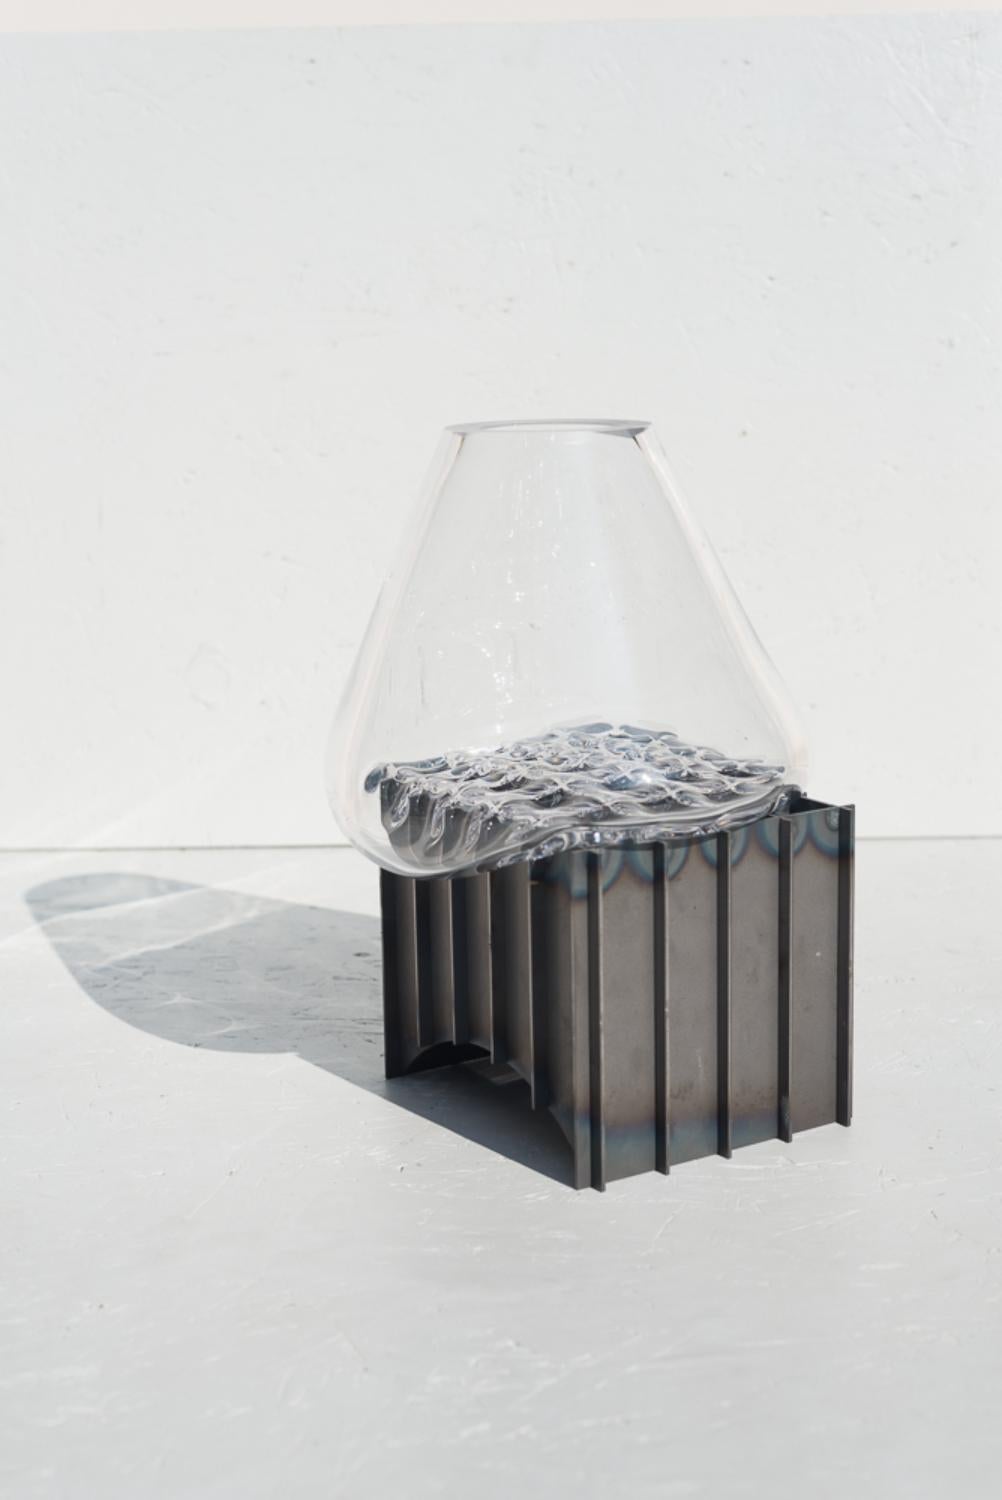 Clear grid table vase by Studio Thier & van Daalen
Dimensions: W 30 x D 30 x H 35cm
Materials: Steel, glass

The studio was keen to find a way to display the fluidity of glass. Therefore they sought the contrast between the industrial steel and